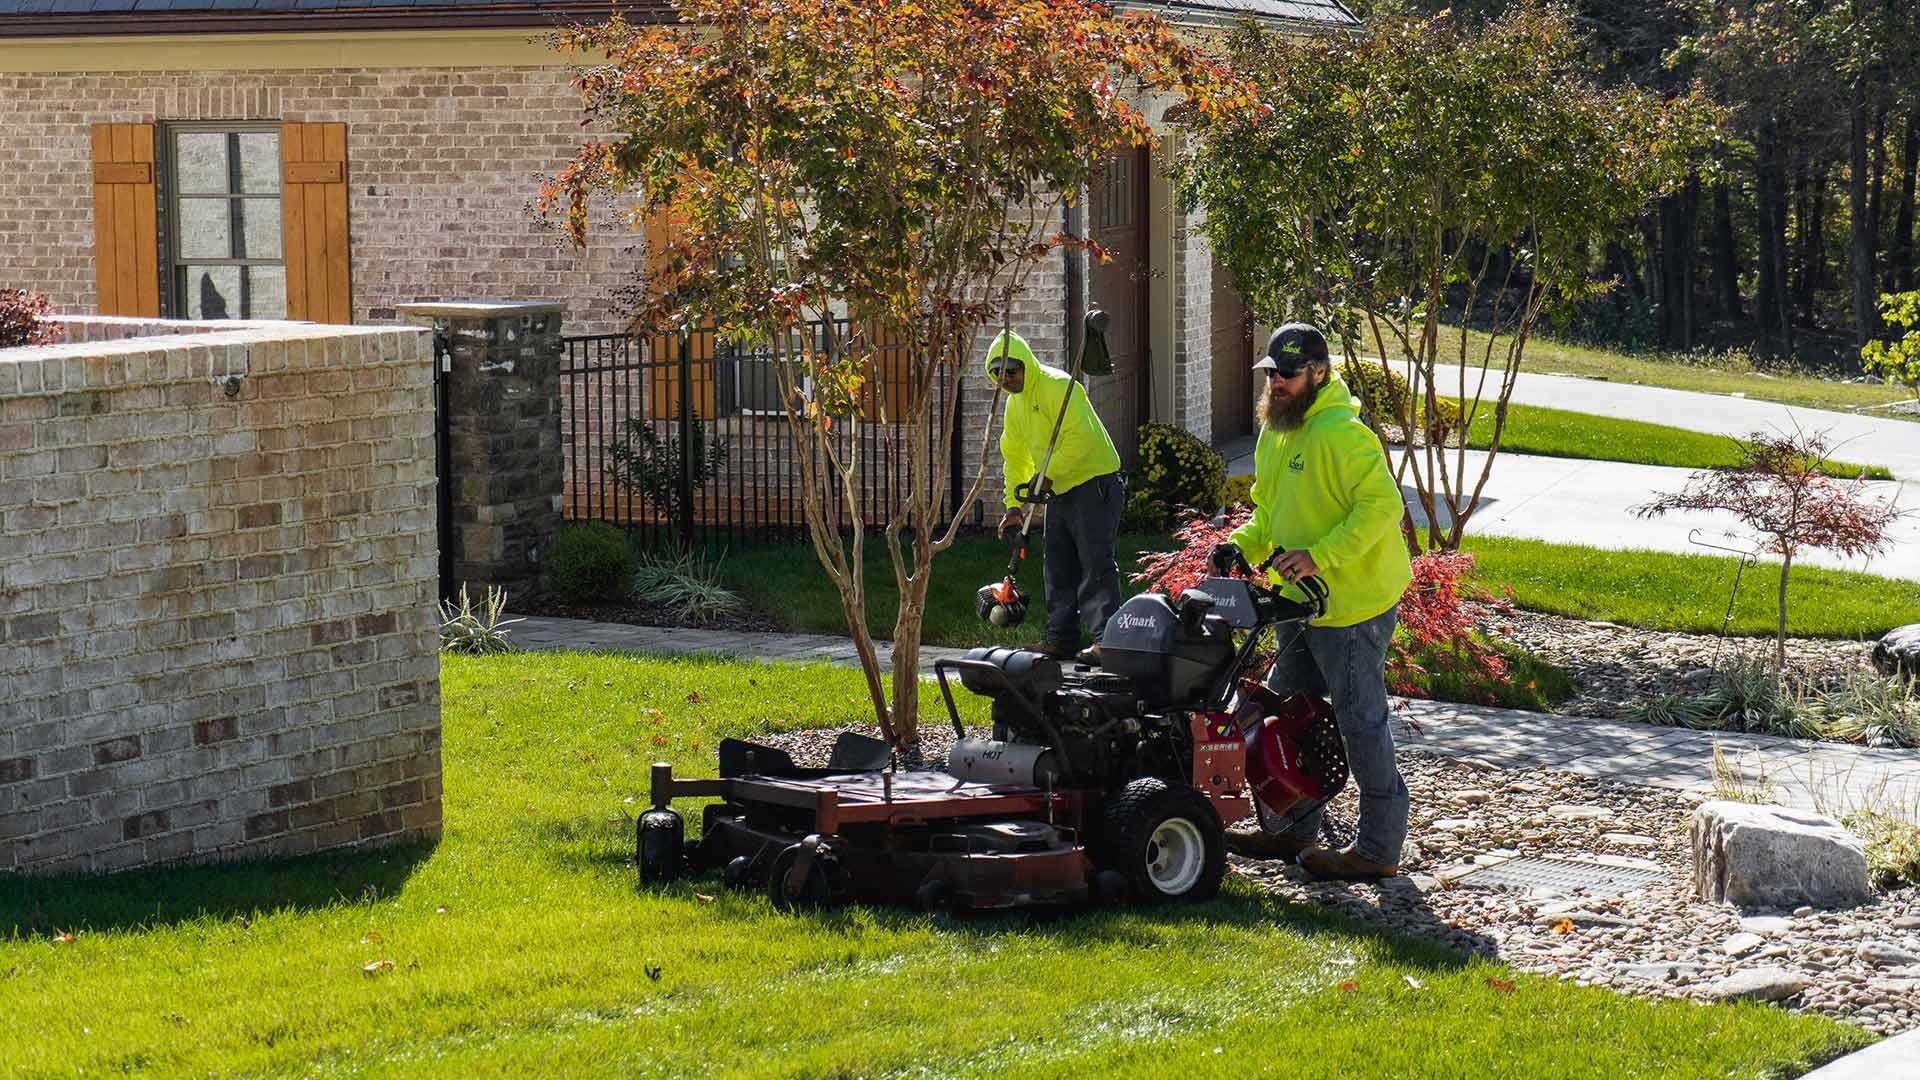 Lawn Mowing Can Be a Real Hassle - Let Professionals Do It for You!